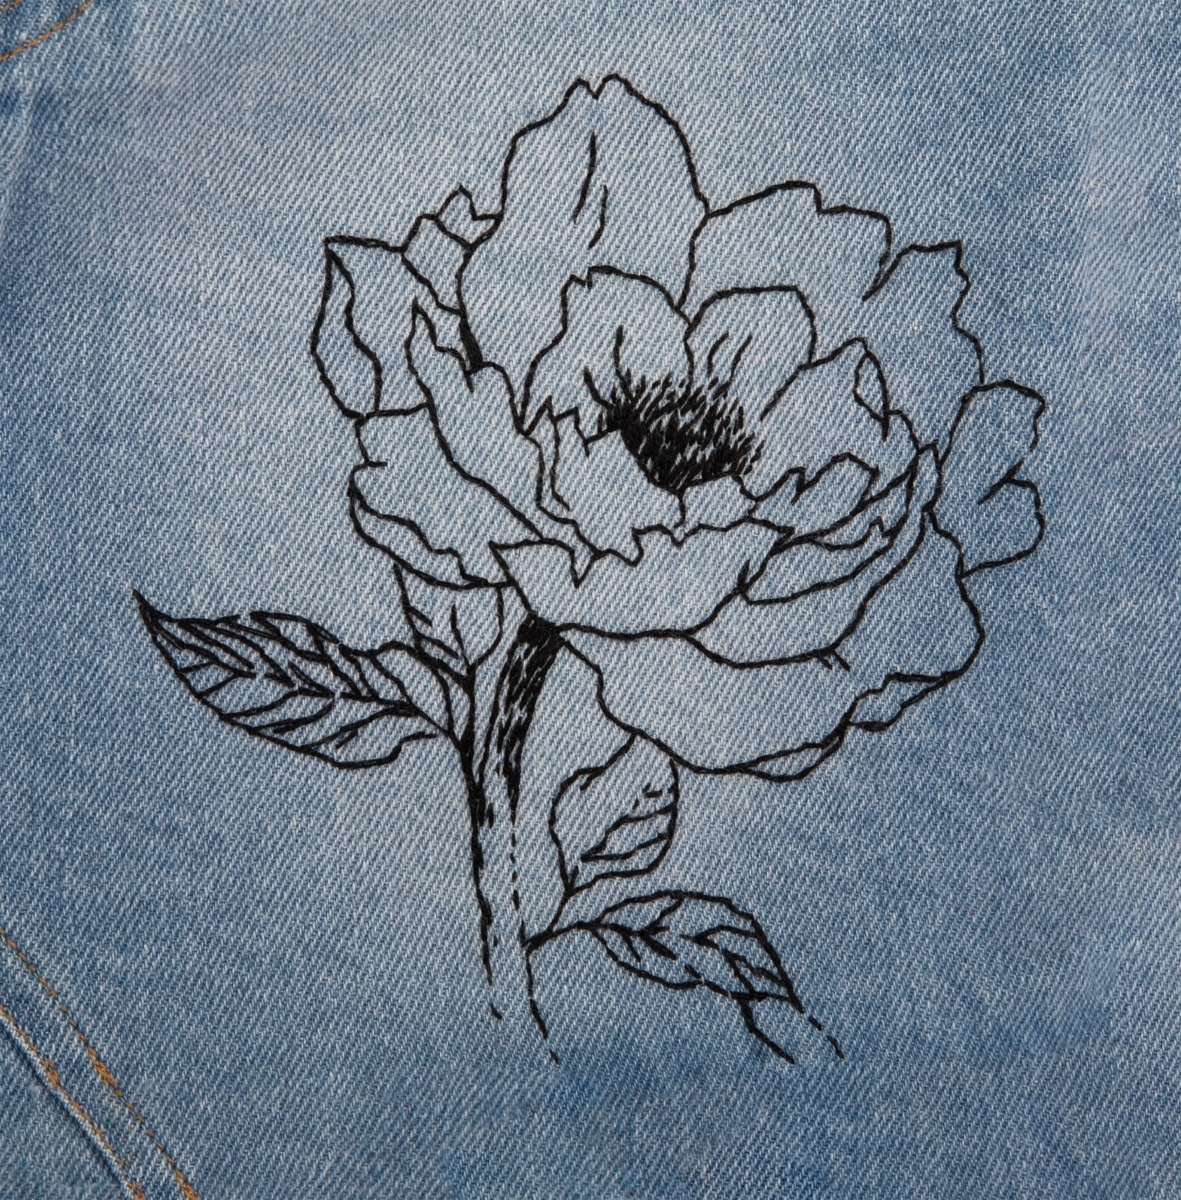 Spring Peonies Embroidery Kit фото 3